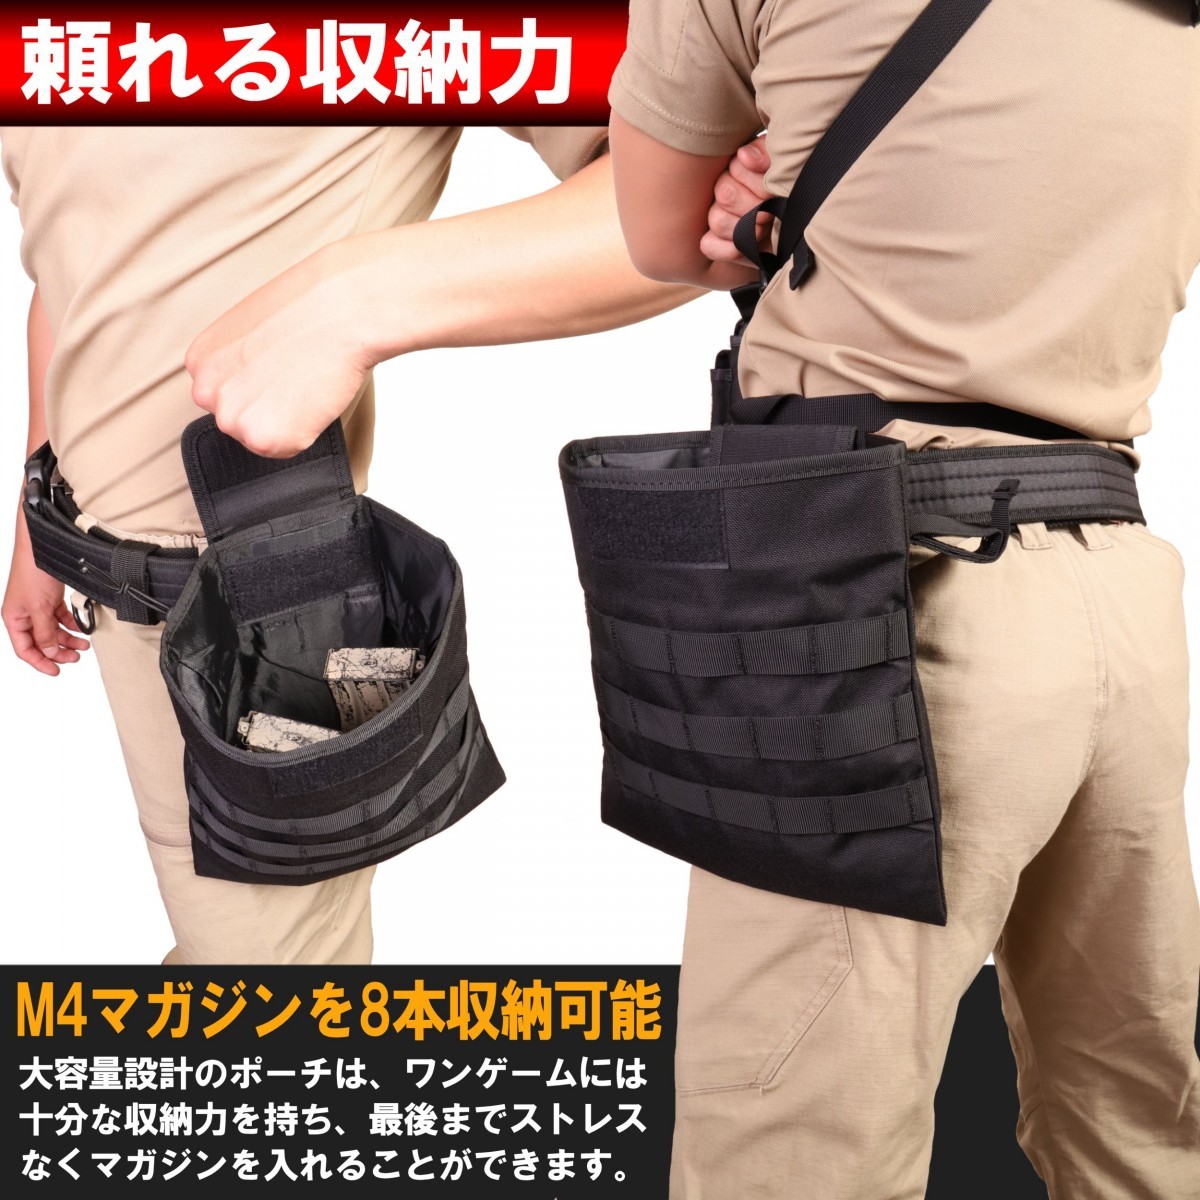  with translation dump pouch high capacity large pouch improved version folding magazine storage Survival game airsoft fixtures 